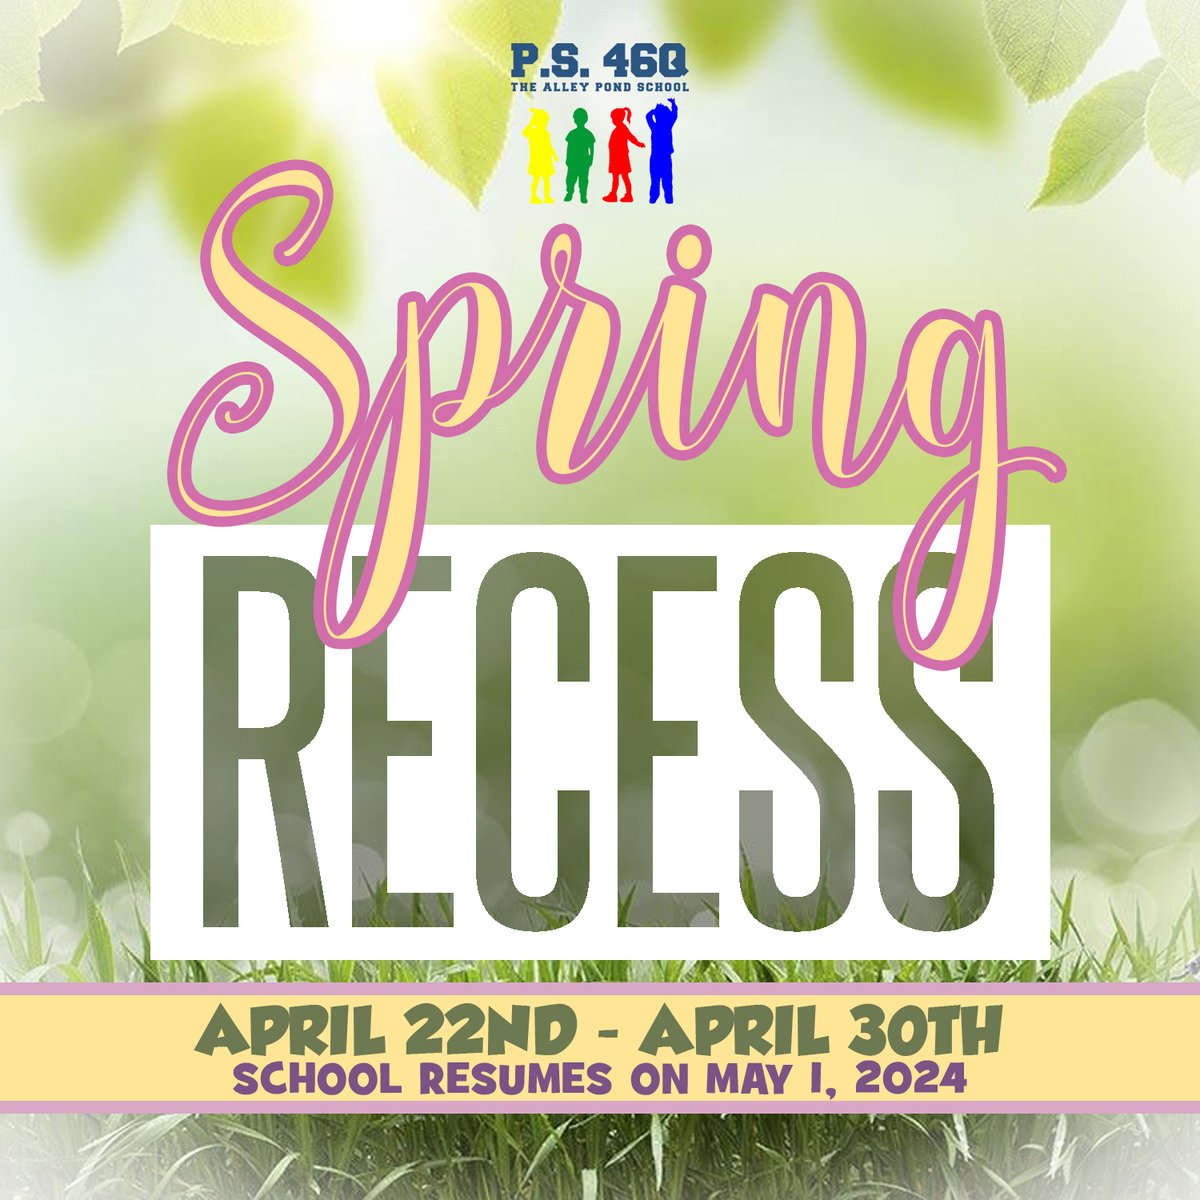 P.S. 46Q will be closed from April 22nd to April 30th for Spring Recess. School will resume on Wednesday, May 1st. We hope everyone enjoys the break :)